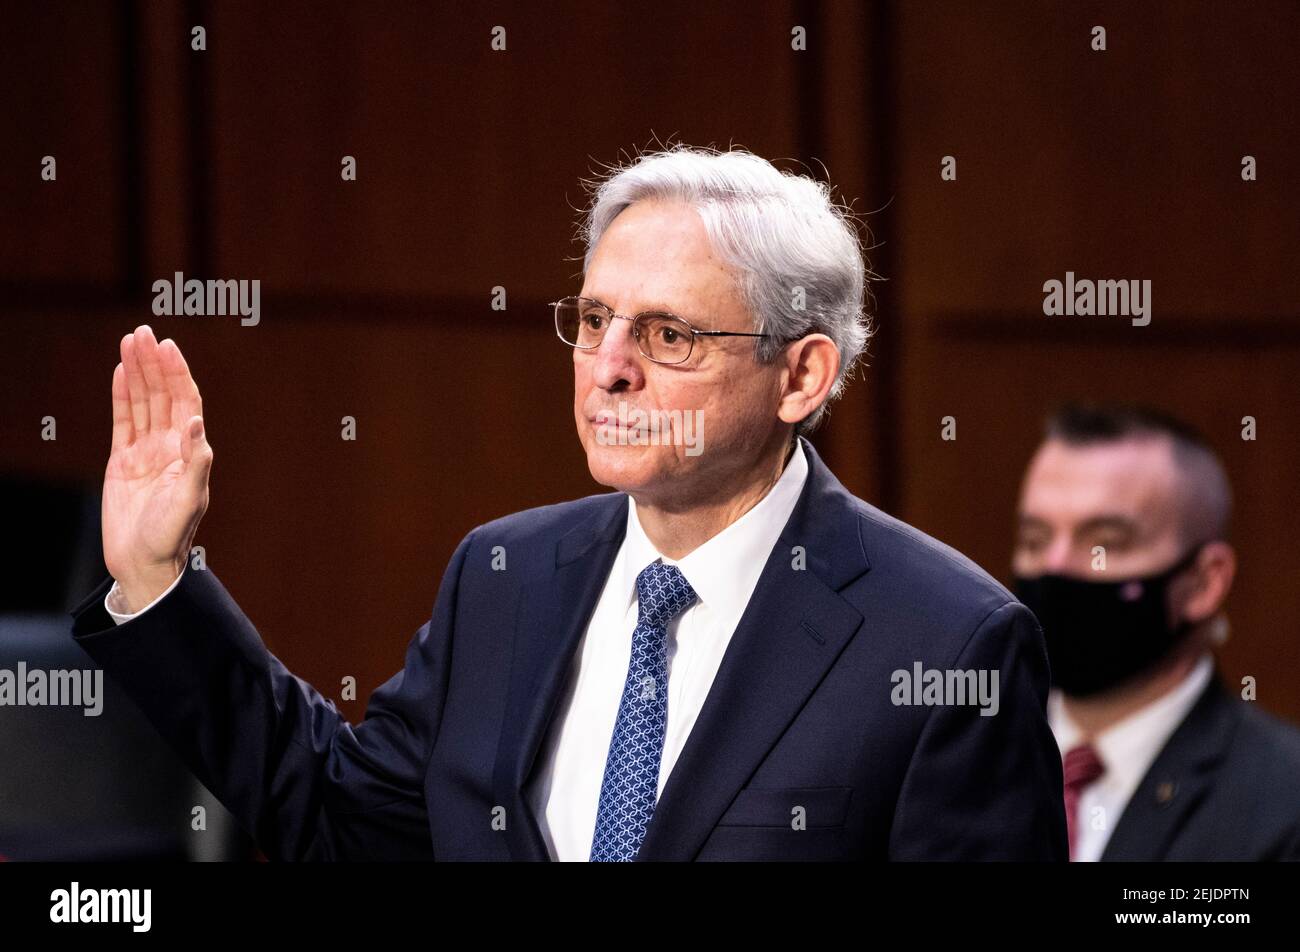 UNITED STATES - FEBRUARY 22: Merrick Garland, center, nominee to be Attorney General, is sworn in for his confirmation hearing in the Senate Judicary Committee on Monday, Feb. 22, 2021. Credit: Bill Clark/Pool via CNP | usage worldwide Stock Photo